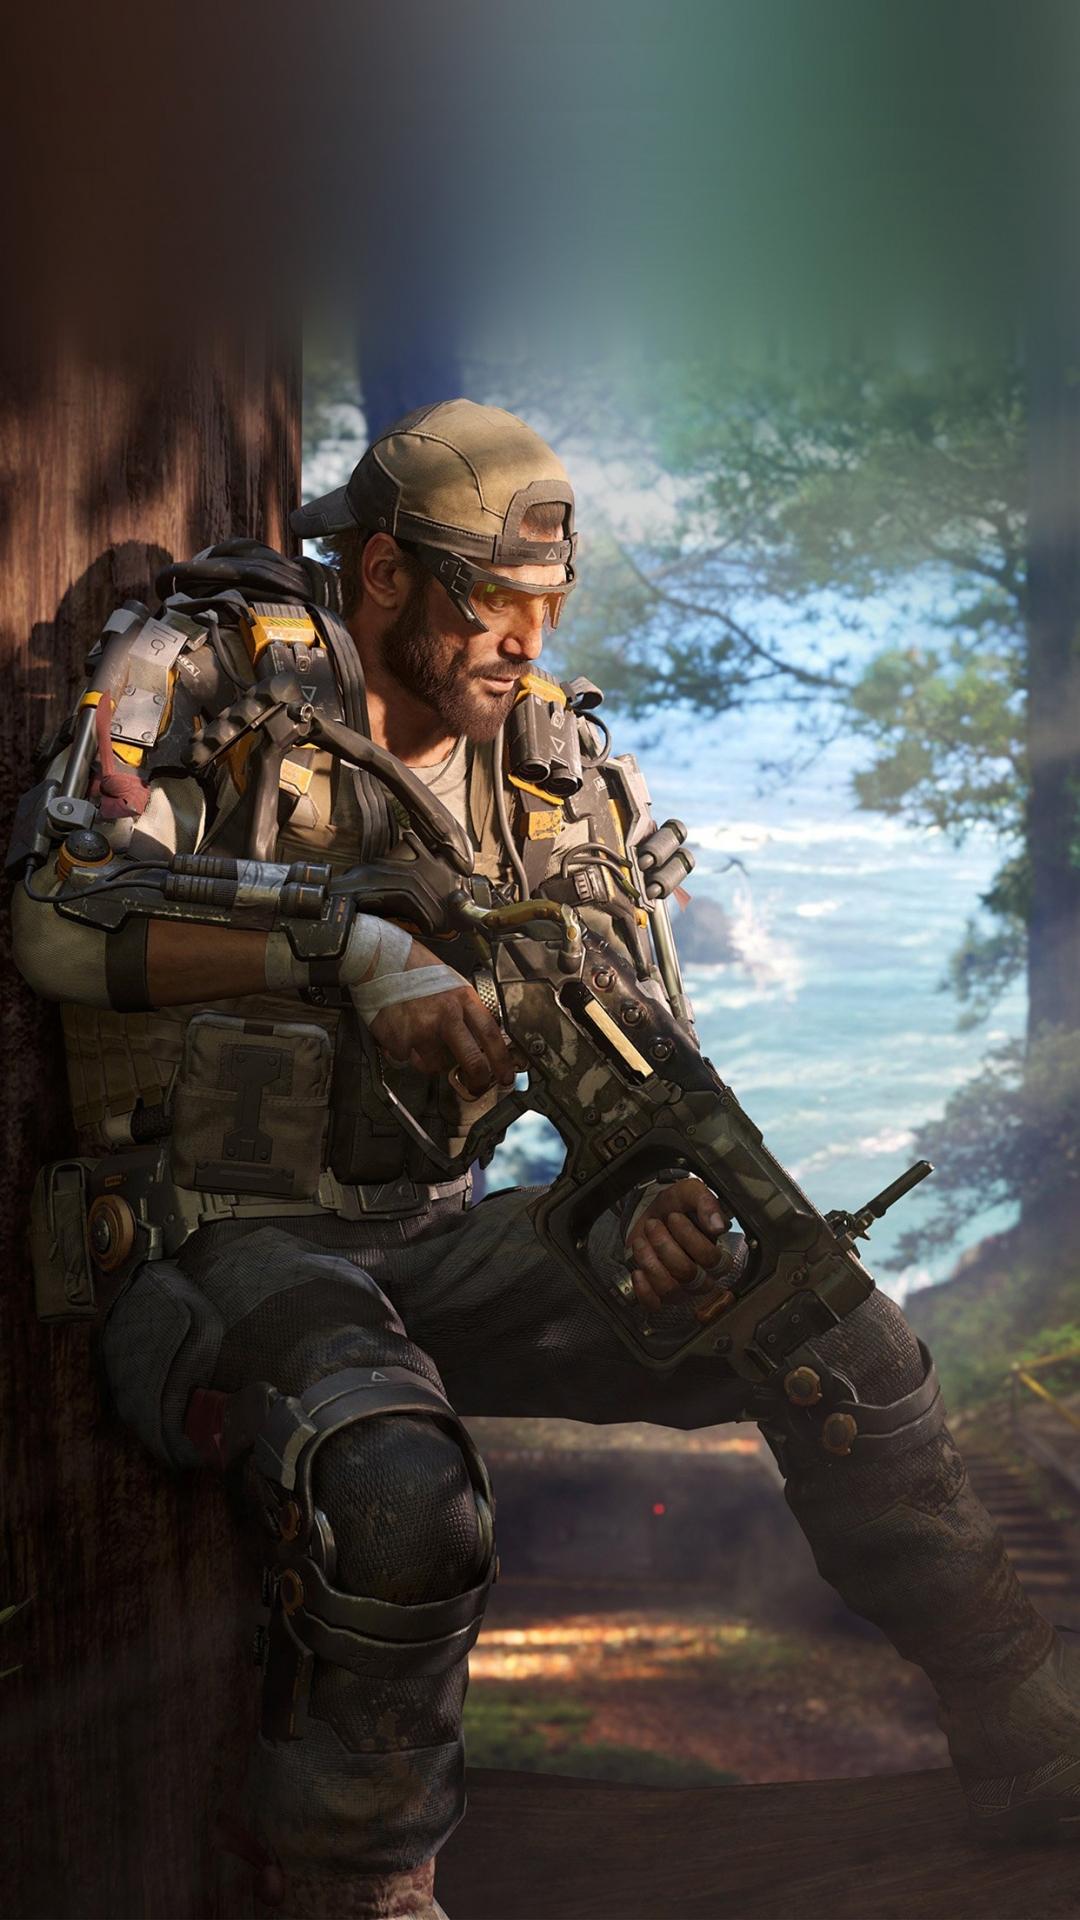 Hd Wallpapers For Android Mobile Full Screen - Nomad Black Ops 3 , HD Wallpaper & Backgrounds